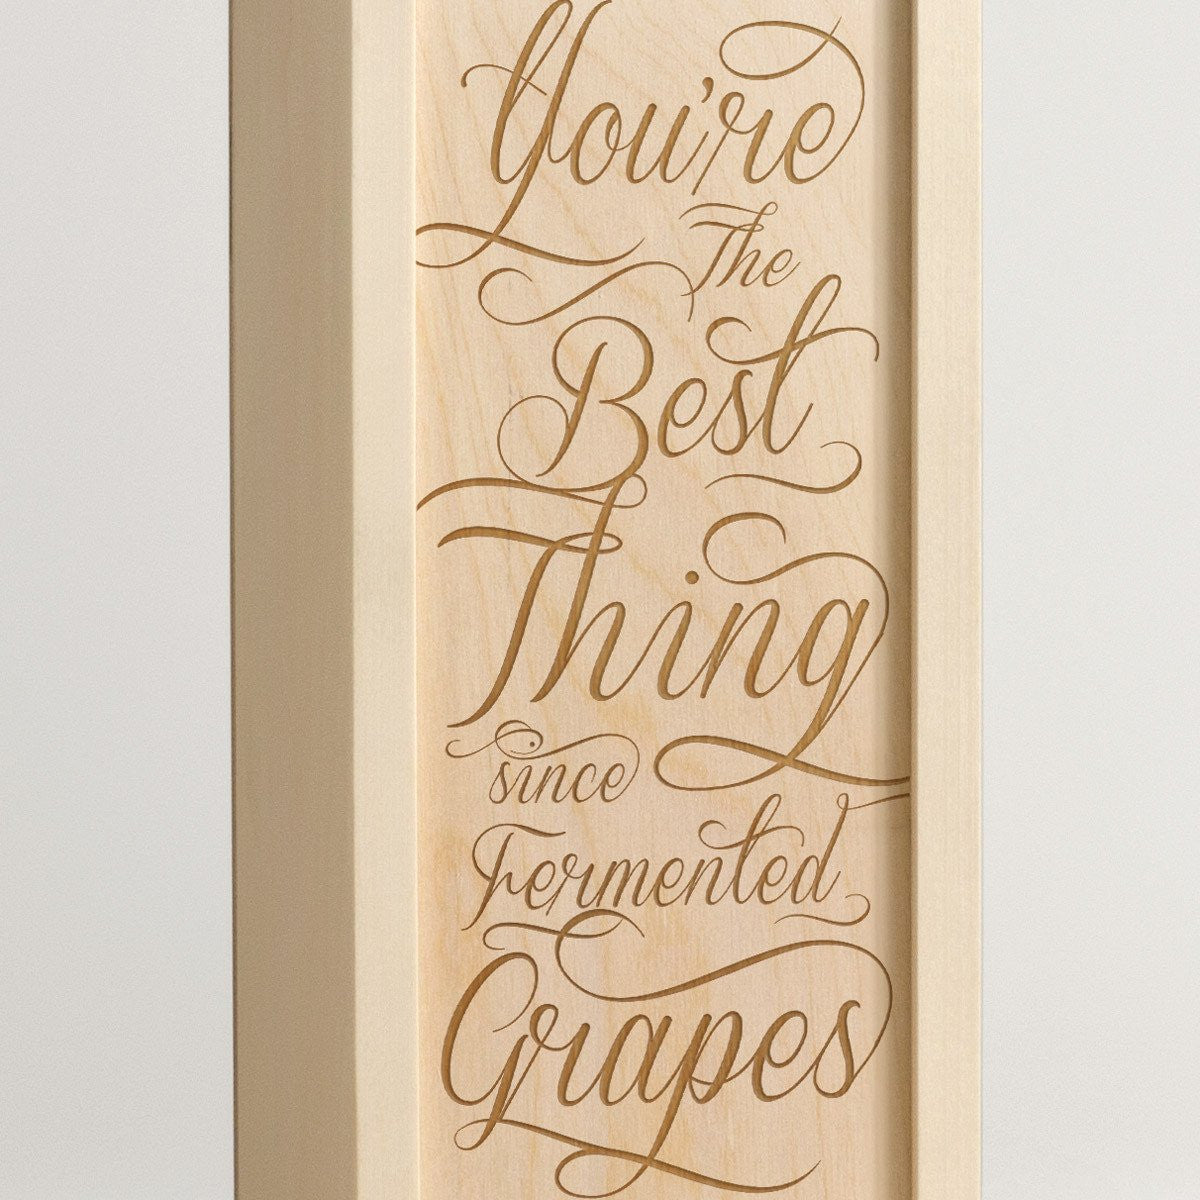 Fermented Grapes - Wine Box -Detail Image